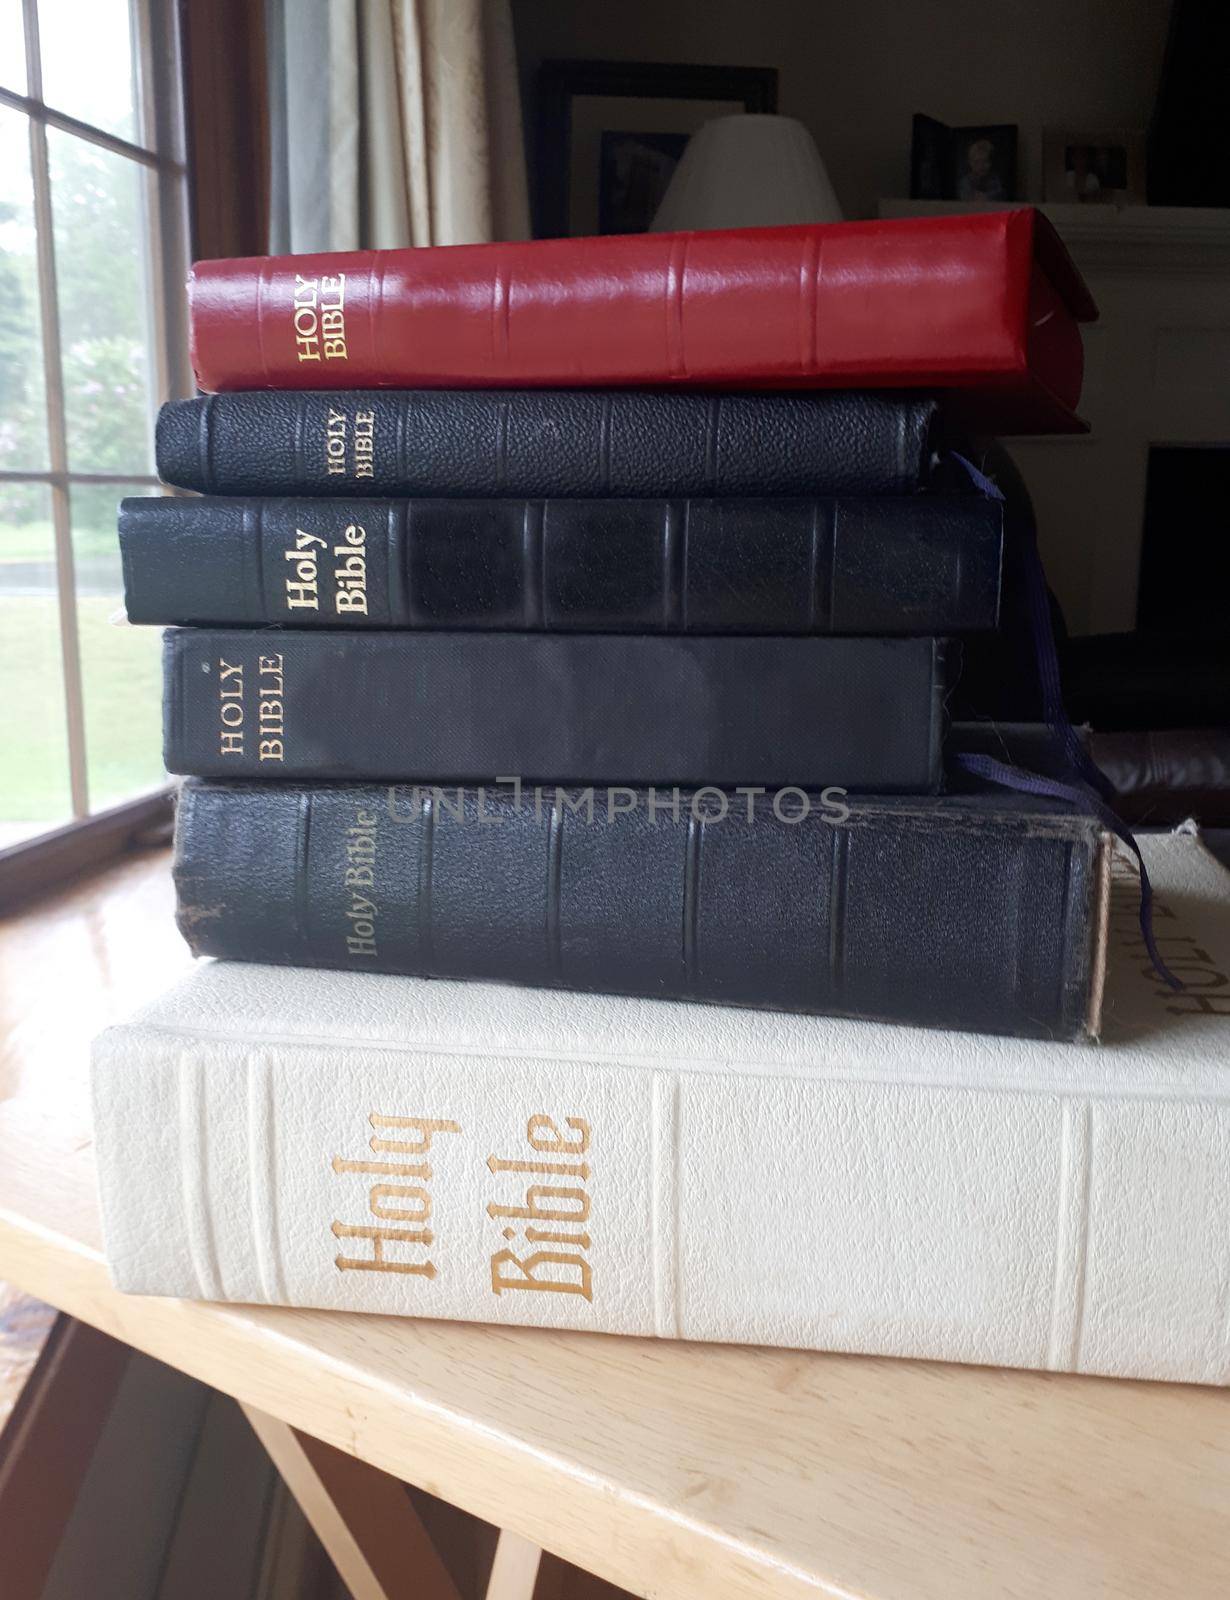 Stack of bibles by rustycanuck